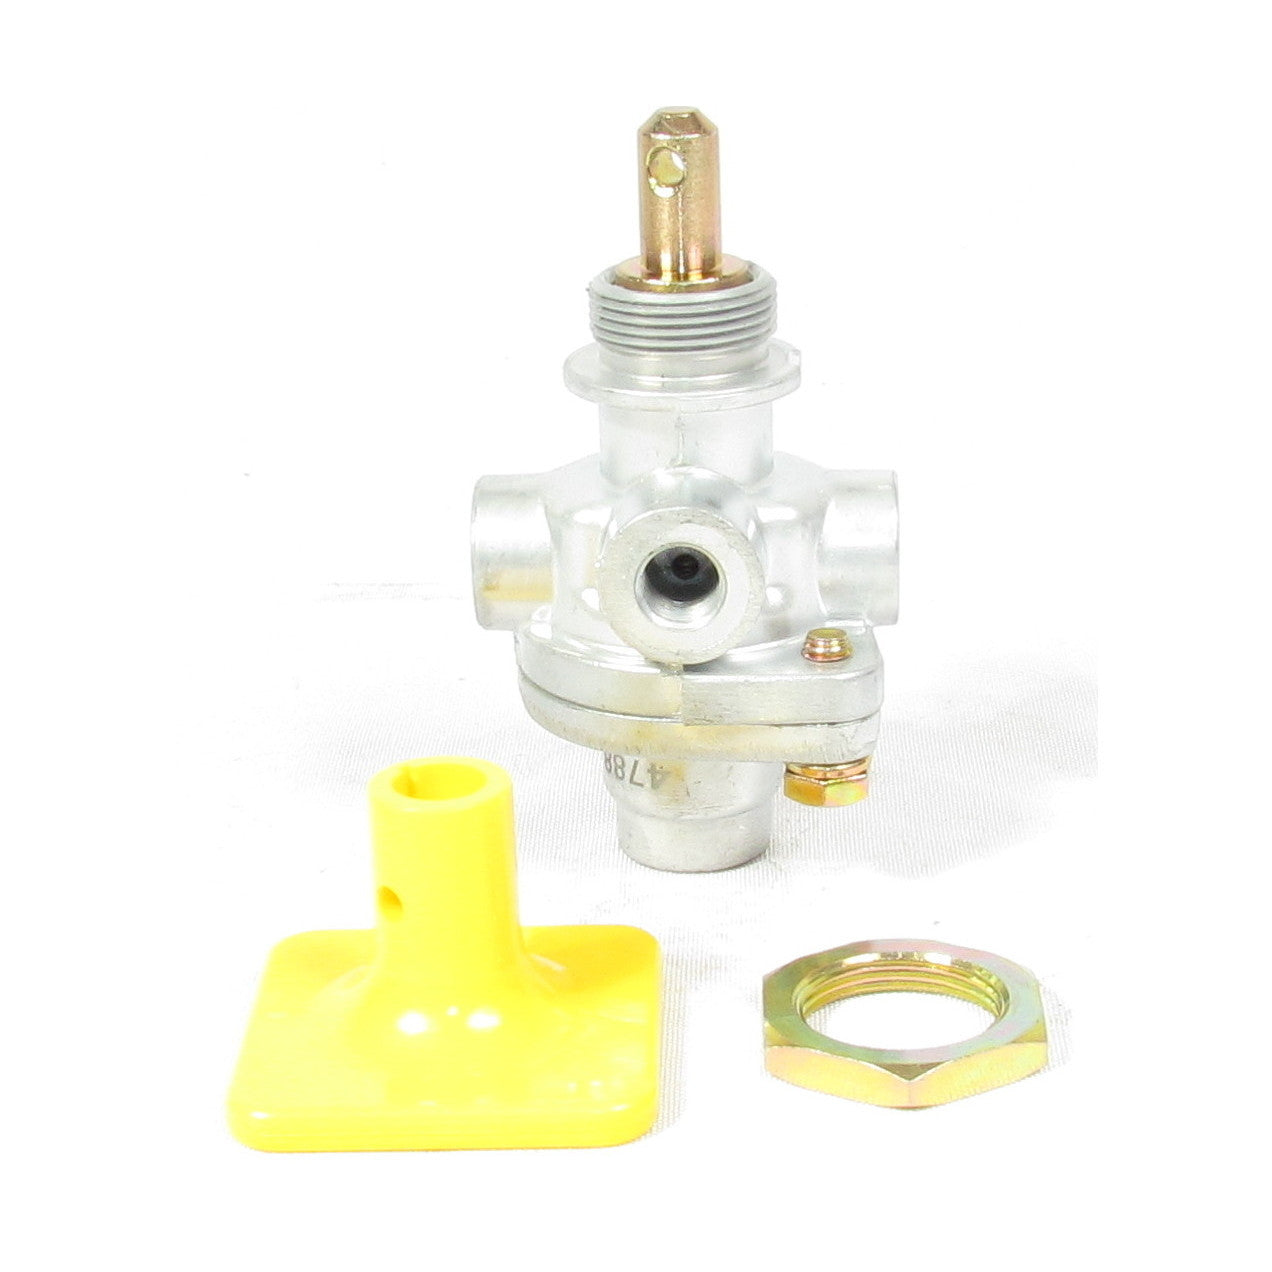 Fortpro PP-1 Push Pull Valve with Knob (Yellow), 1/8" Ports Replacement for Bendix 284171 | F224788